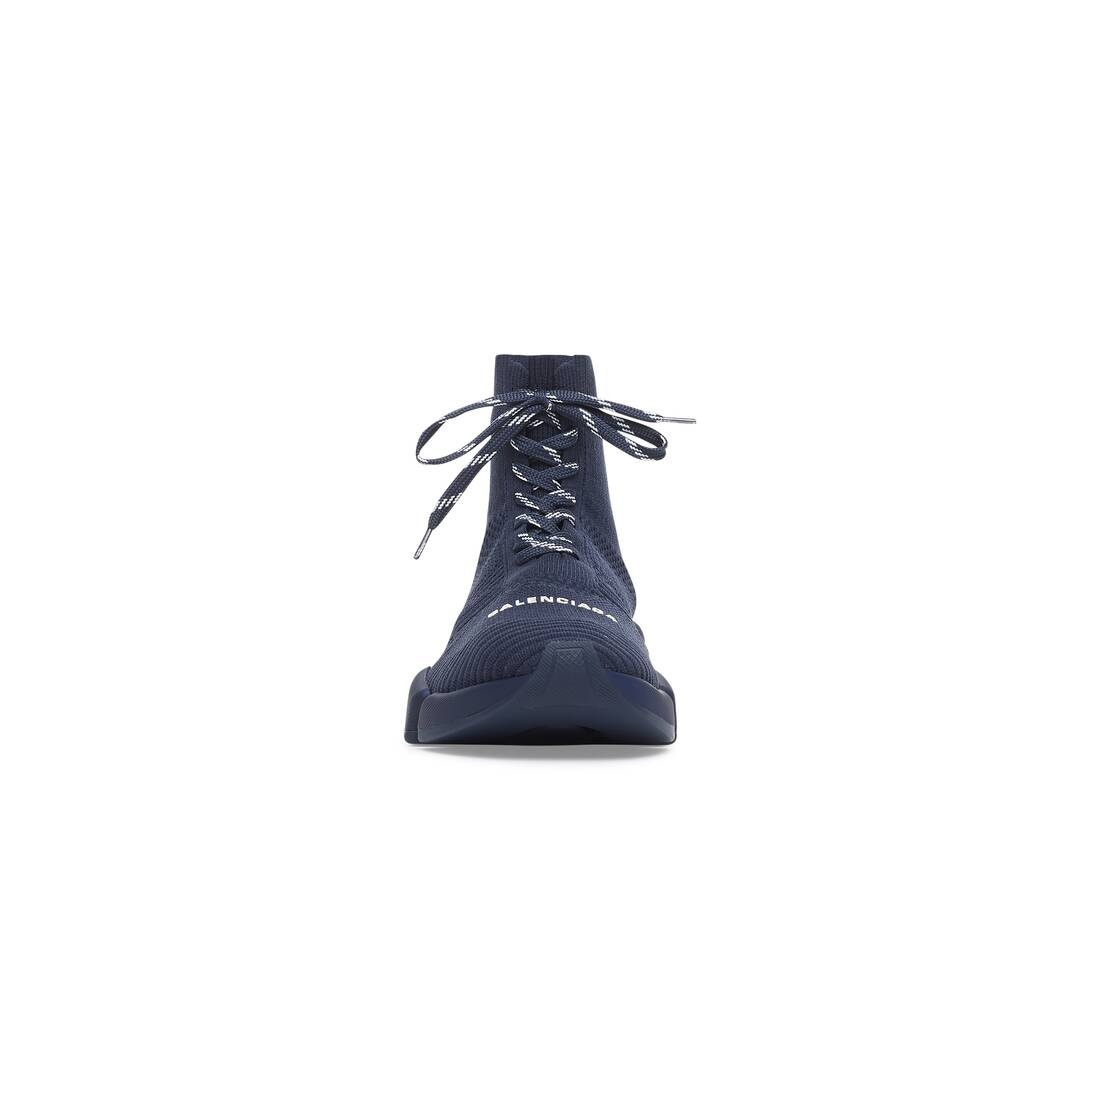 Men's Speed 2.0 Lace-up Recycled Knit Sneaker in Dark Blue - 3